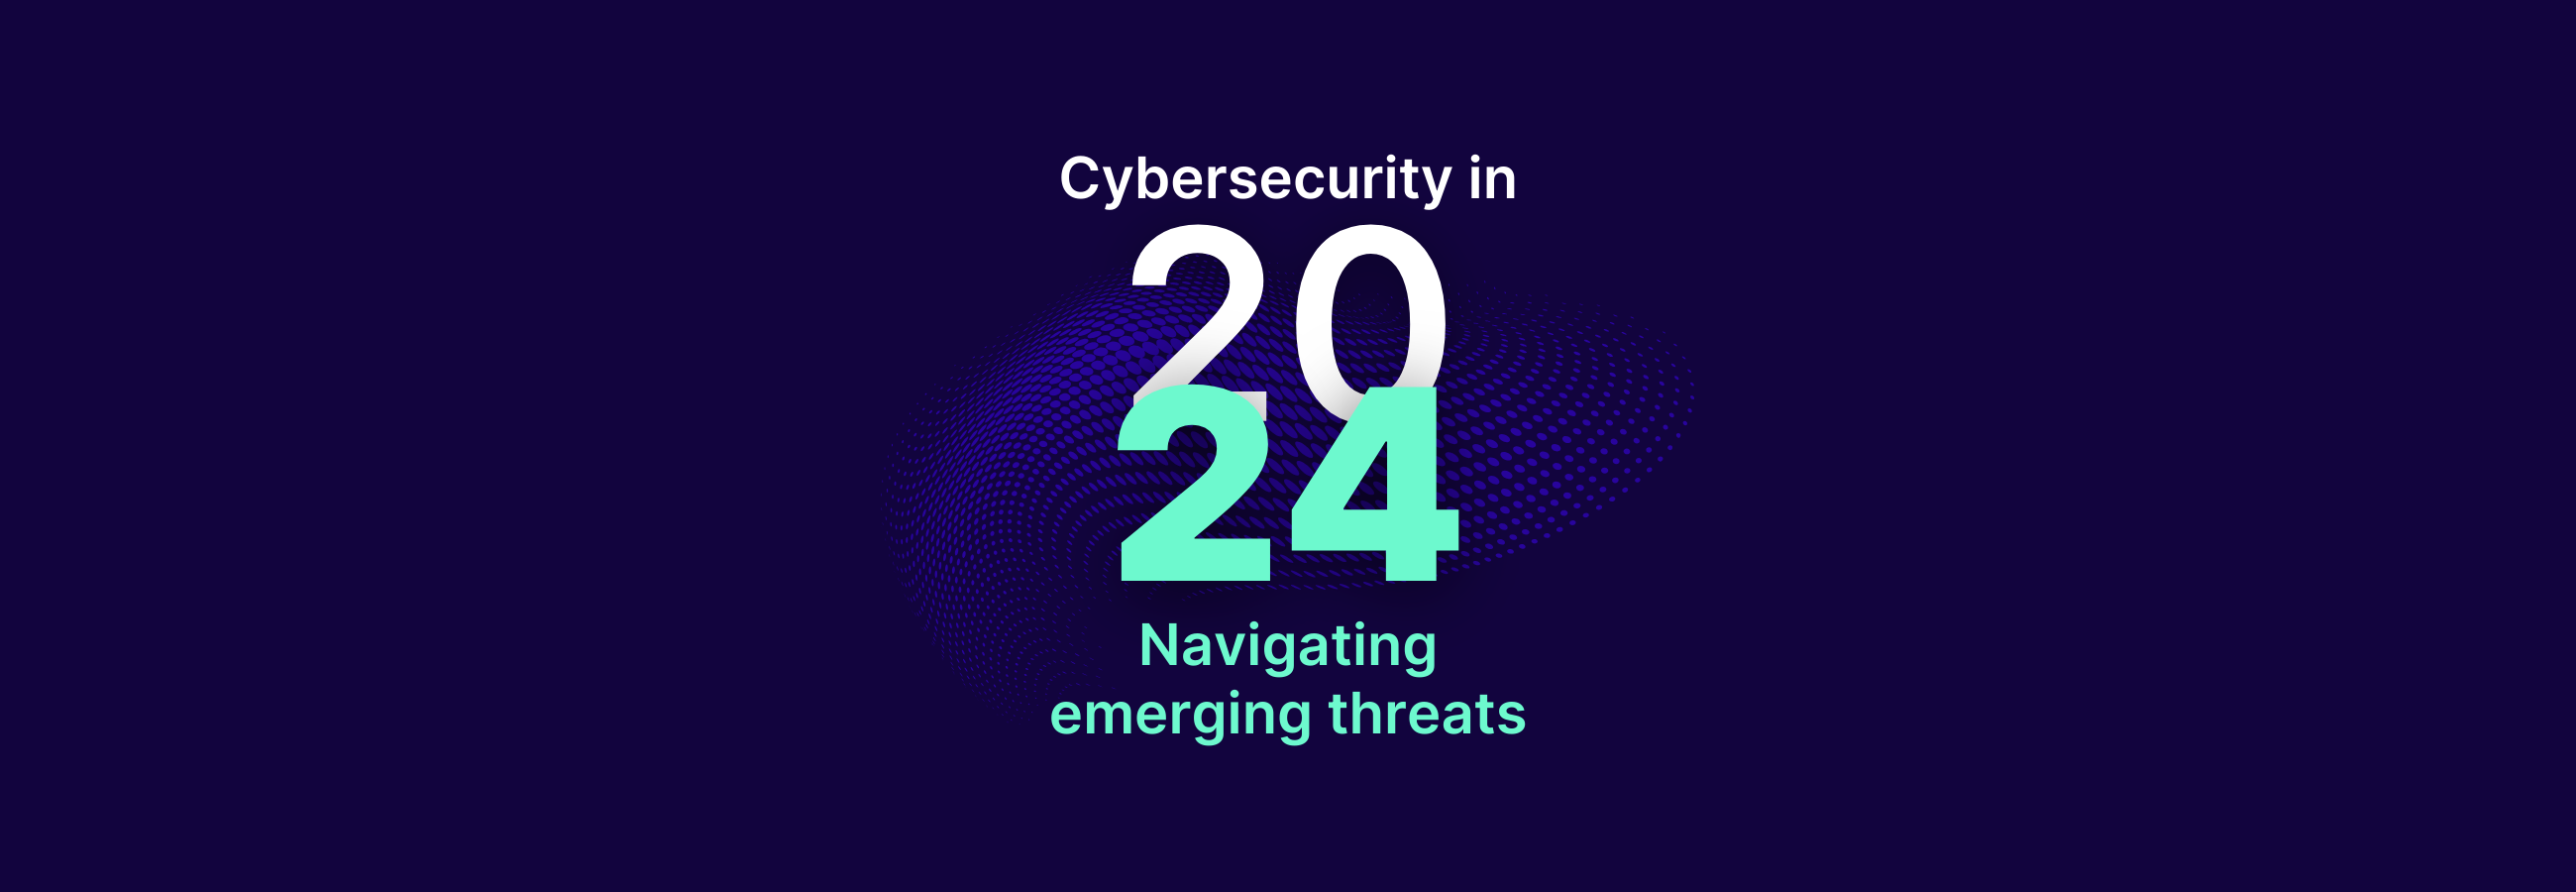 Cybersecurity in 2024: Navigating emerging threats